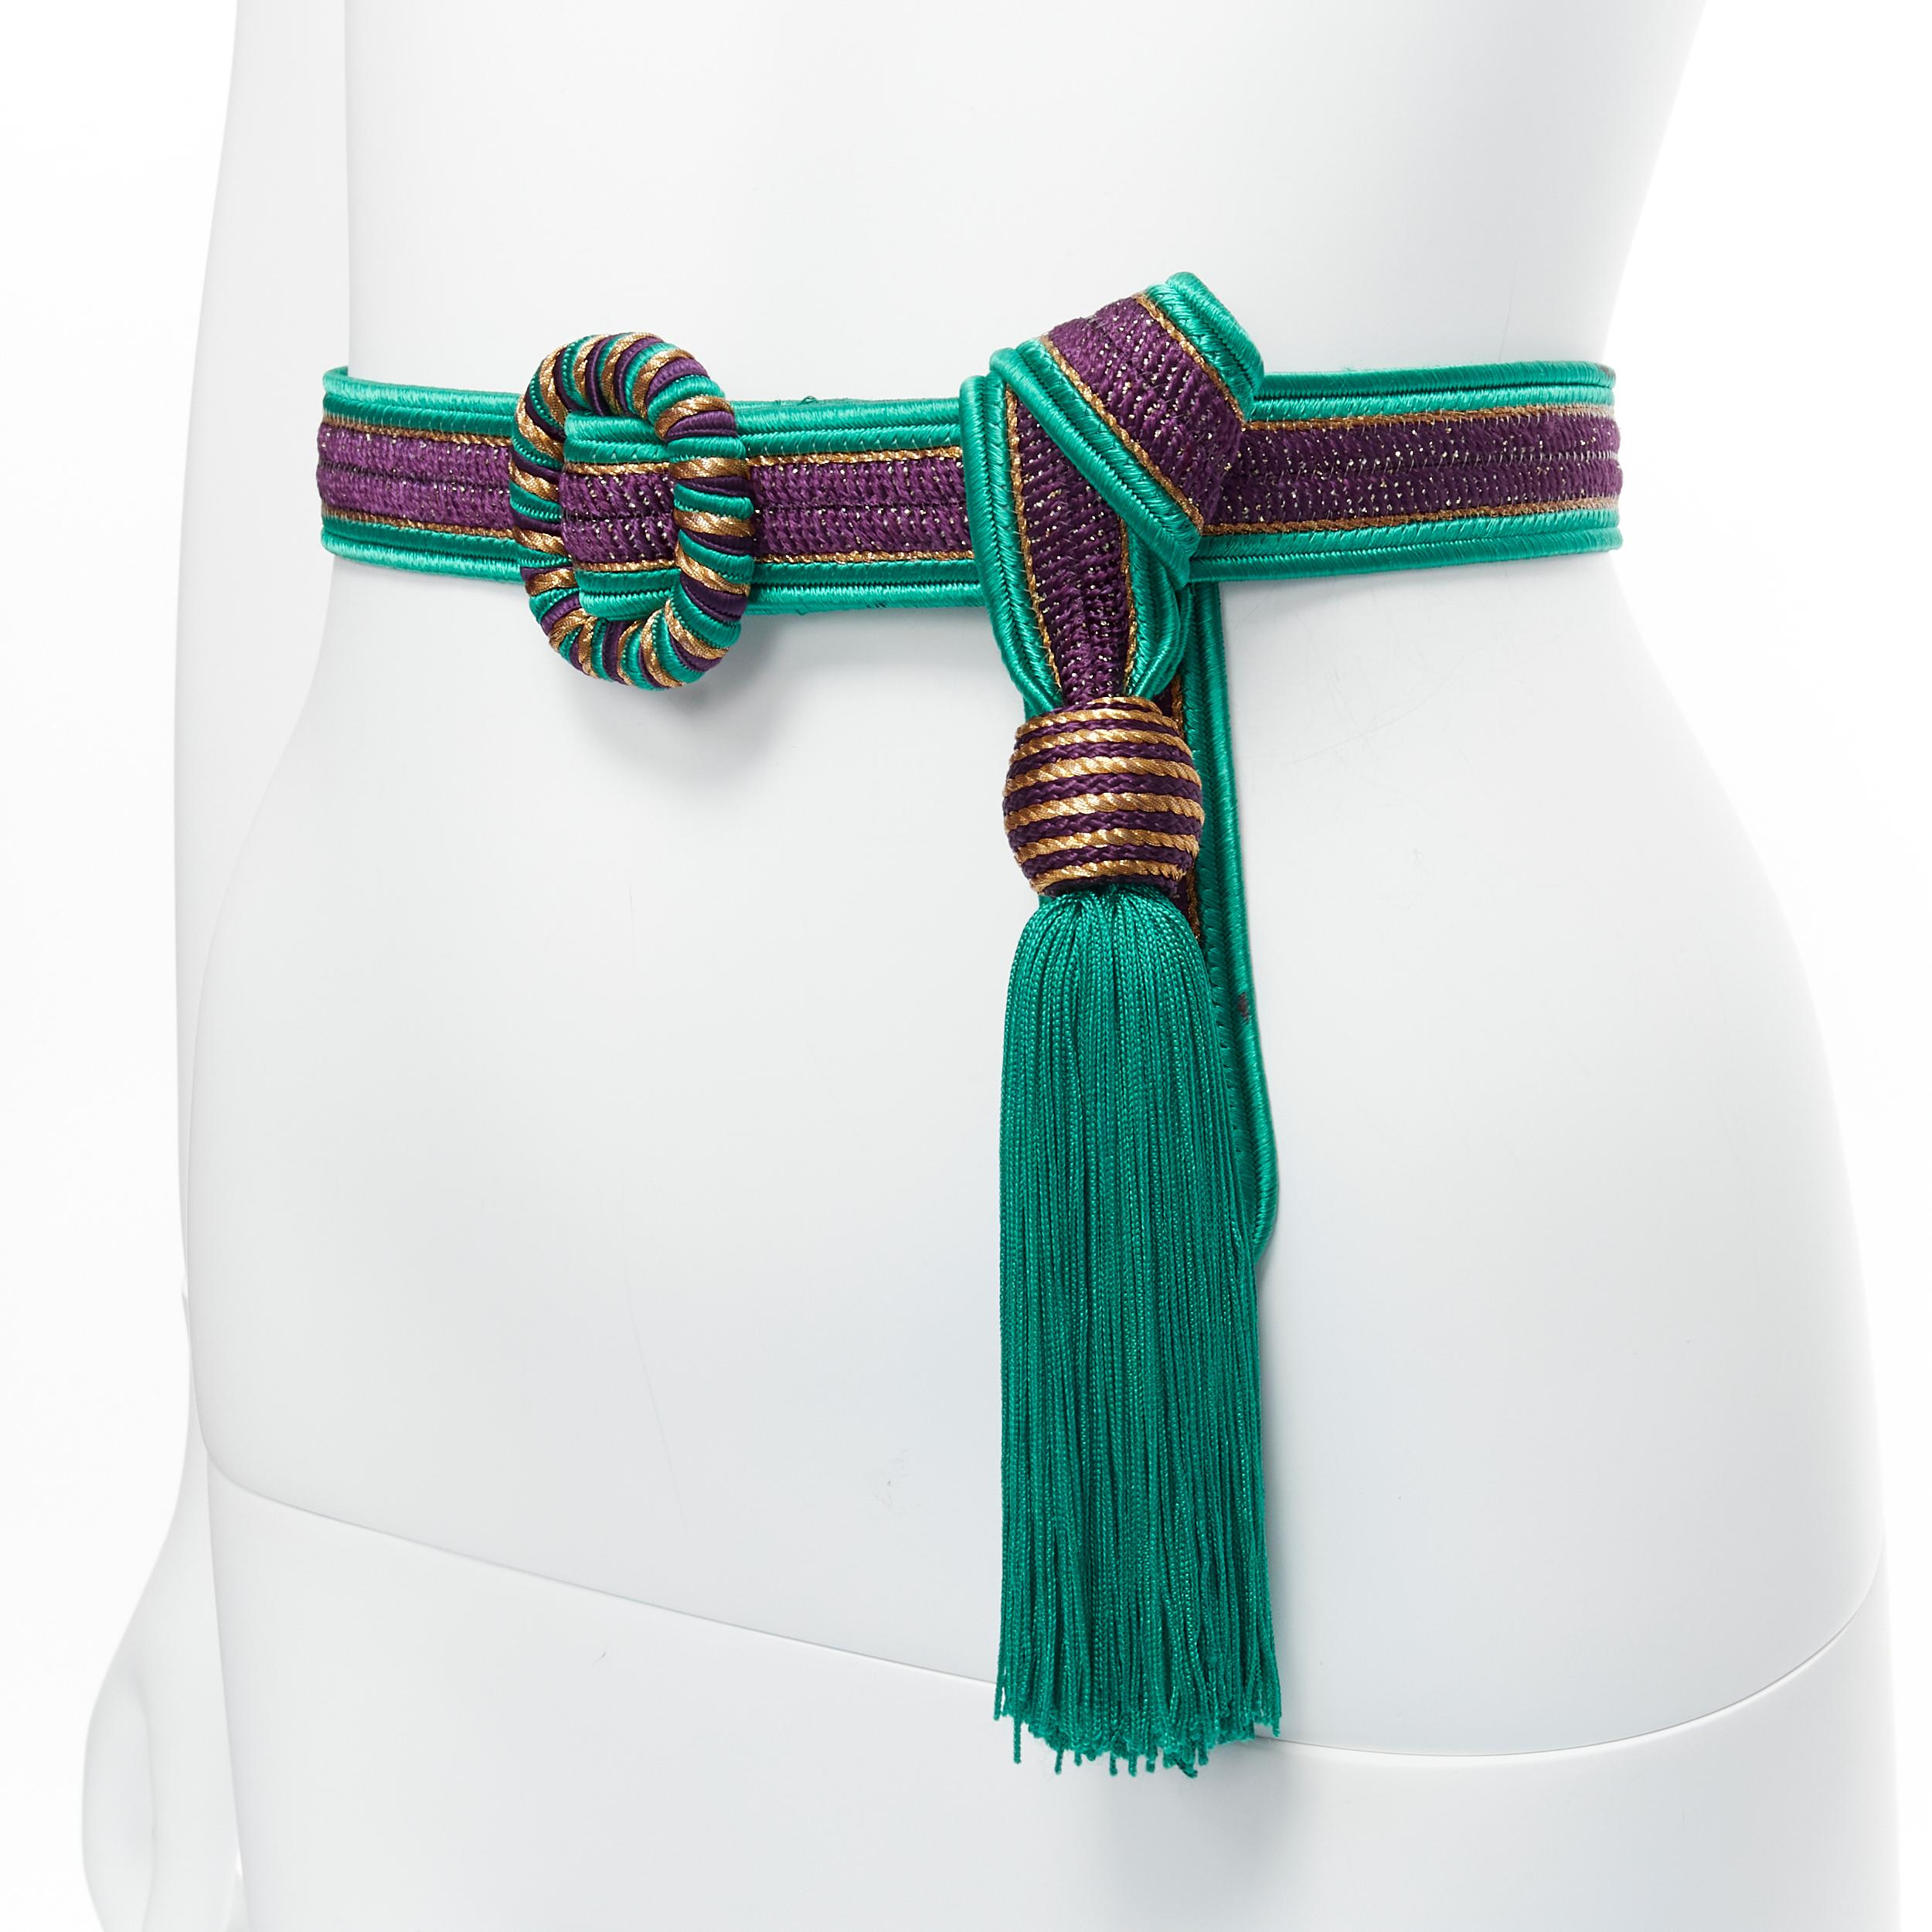 YVES SAINT LAURENT Rive Gauche 1980's green purple gold tassel woven hobo waist belt
Reference: TGAS/D00213
Brand: Yves Saint Laurent
Material: Fabric
Color: Green, Purple
Pattern: Solid
Closure: Belt
Extra Details: Gold tiny YSL plate.
Made in: